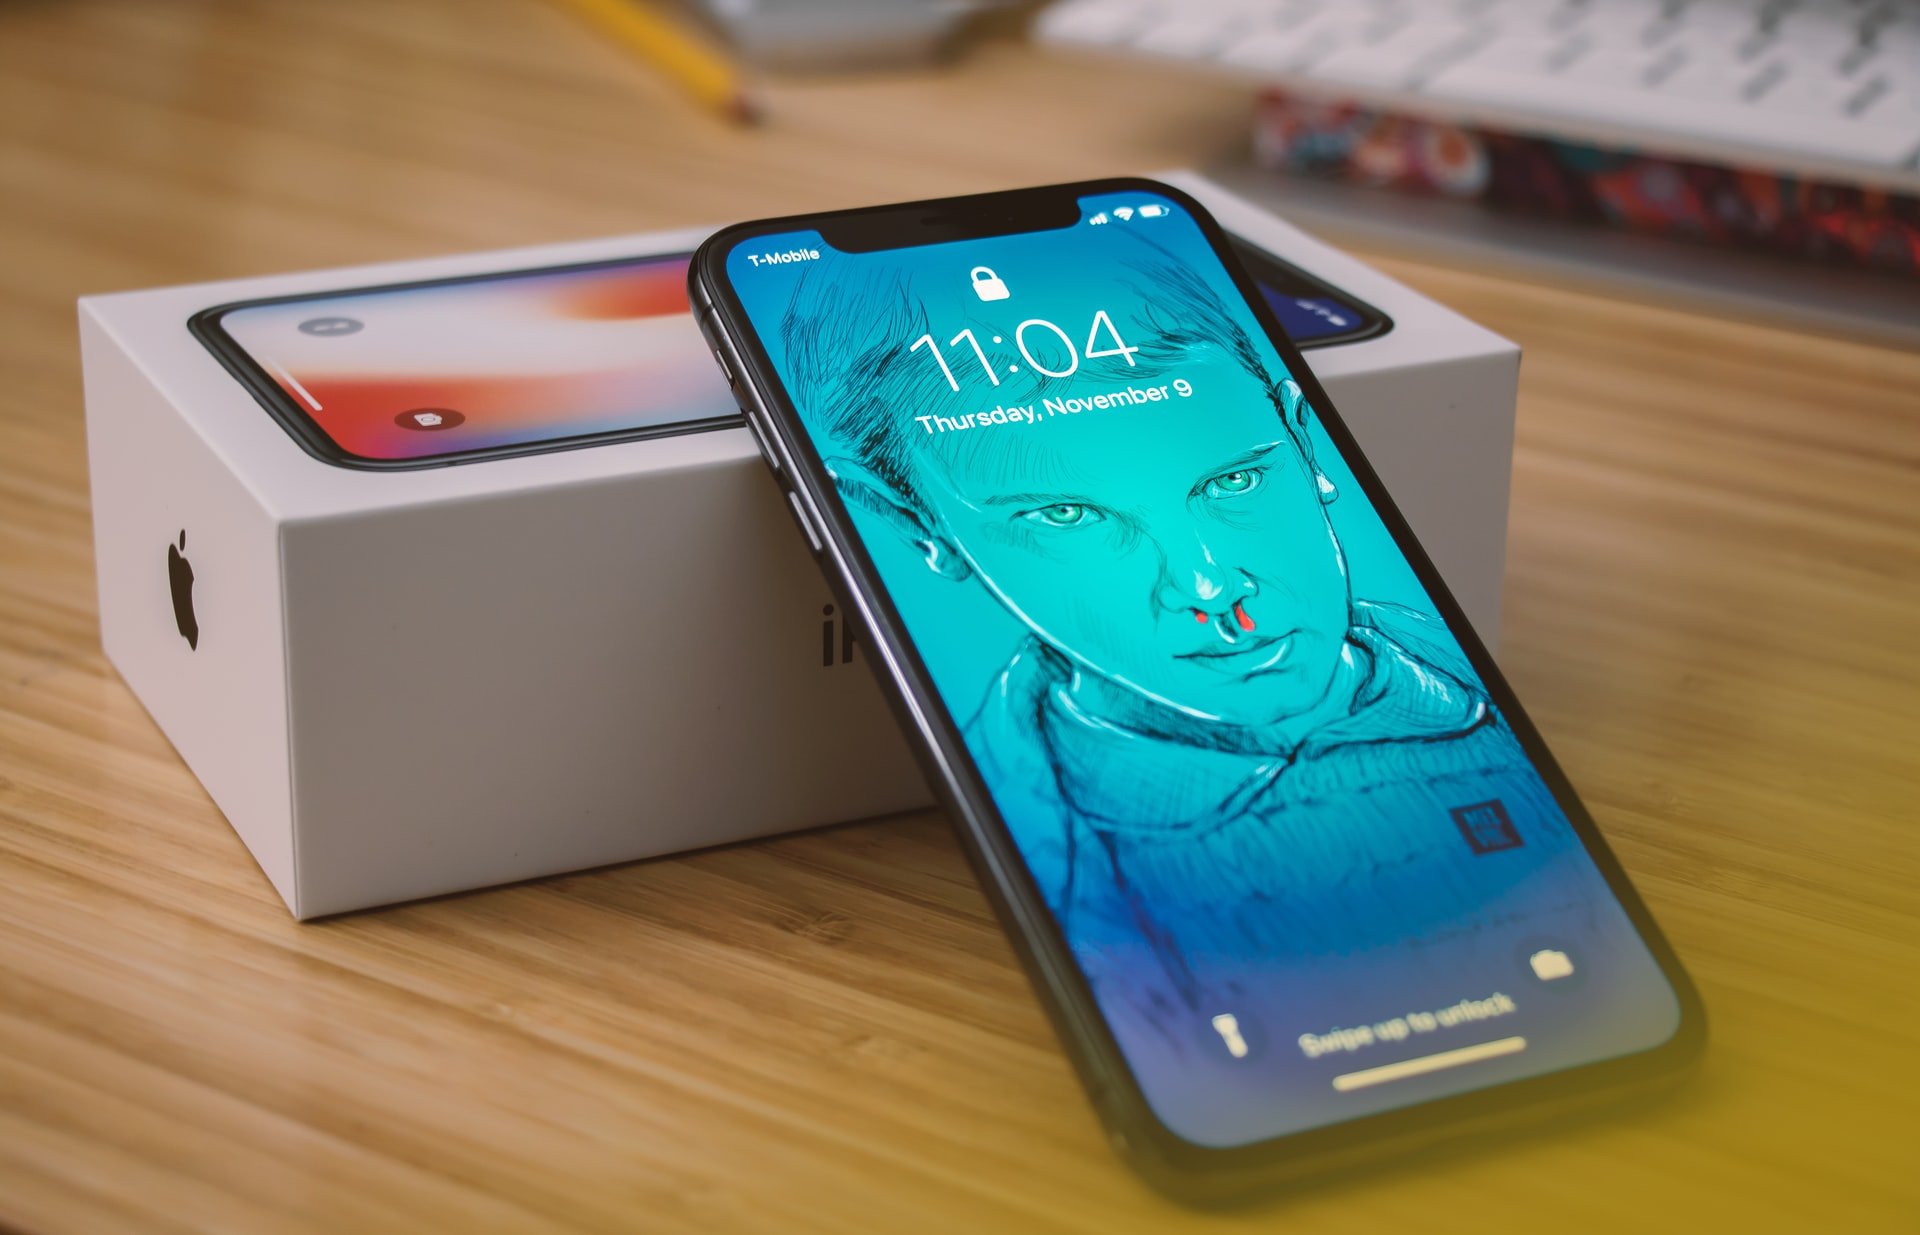 Brand new iPhone X with box on table | Source: Unsplash